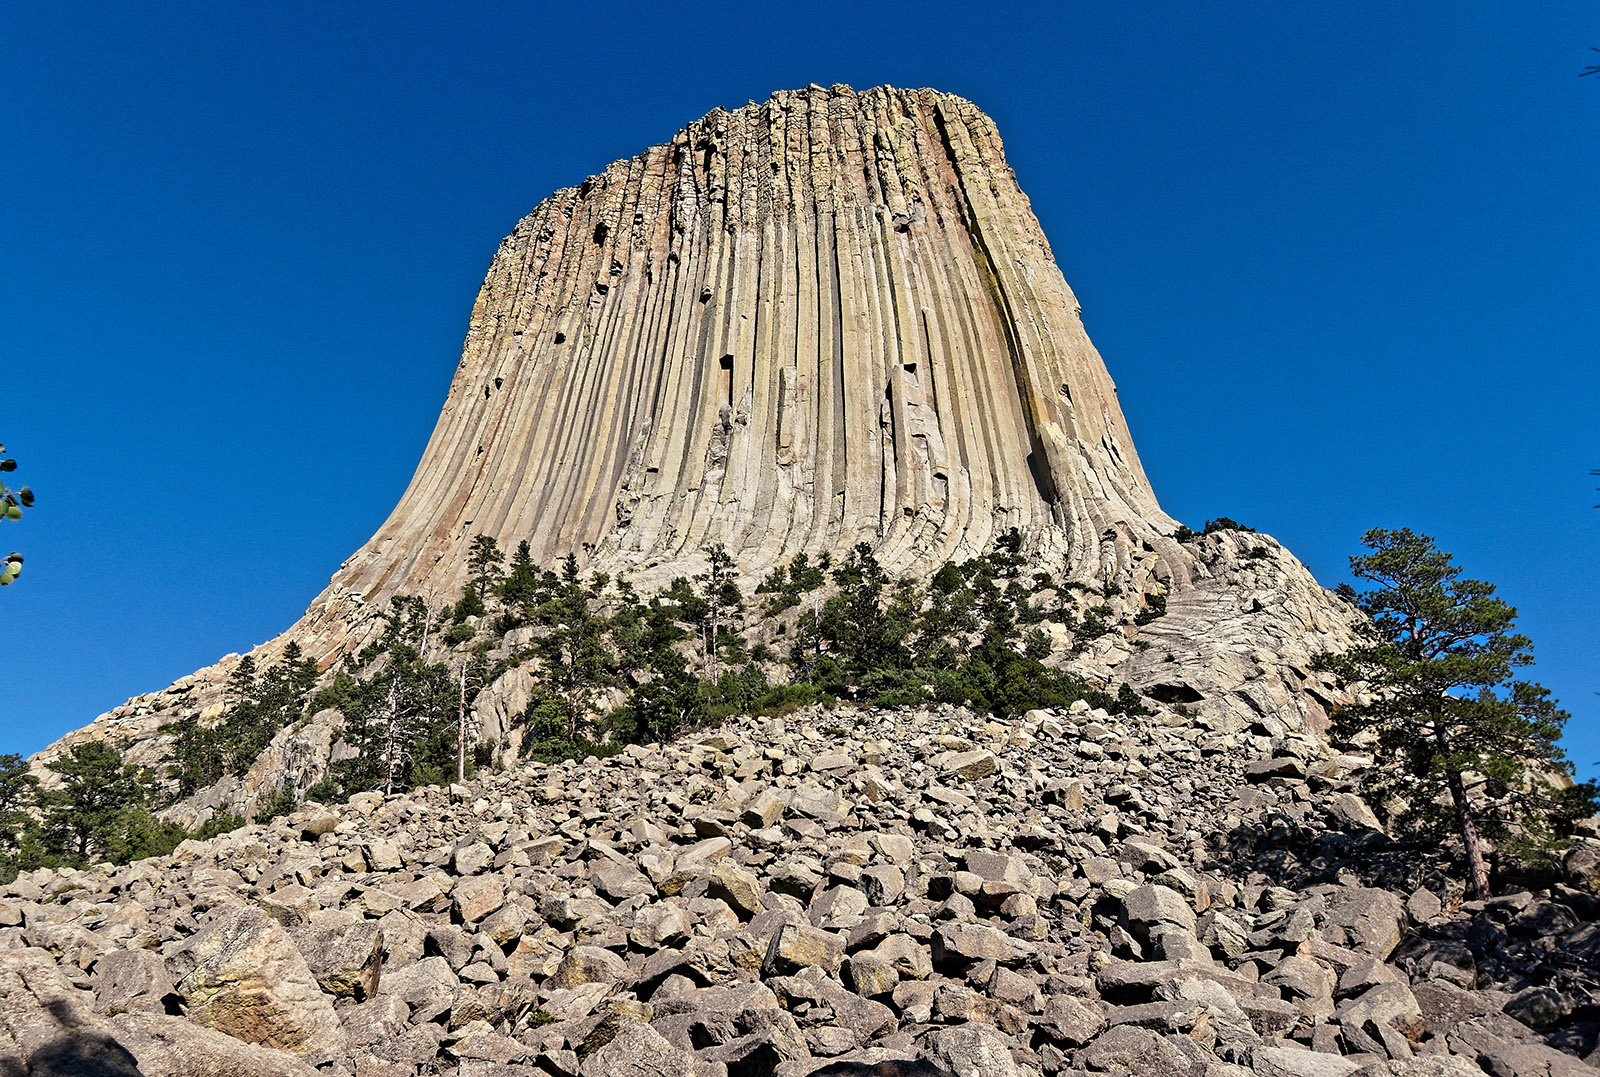 Devils Tower was created by protusion of magma from deep layers of the earth through Cretaceous sedimentary layers approximately 56 to 66 years ago.  The magma cooled at a speed that allowed the formation of jointed columns with 4 to 6 sides.  The surrounding sedimentary rock eroded leaving the igneous tower.  There is debate whether this a volcanic vent and that the magma was extruded or that it was intrusive magma flow below ground to form a laccolith  and subsequently was eroded to expose the igneous body.